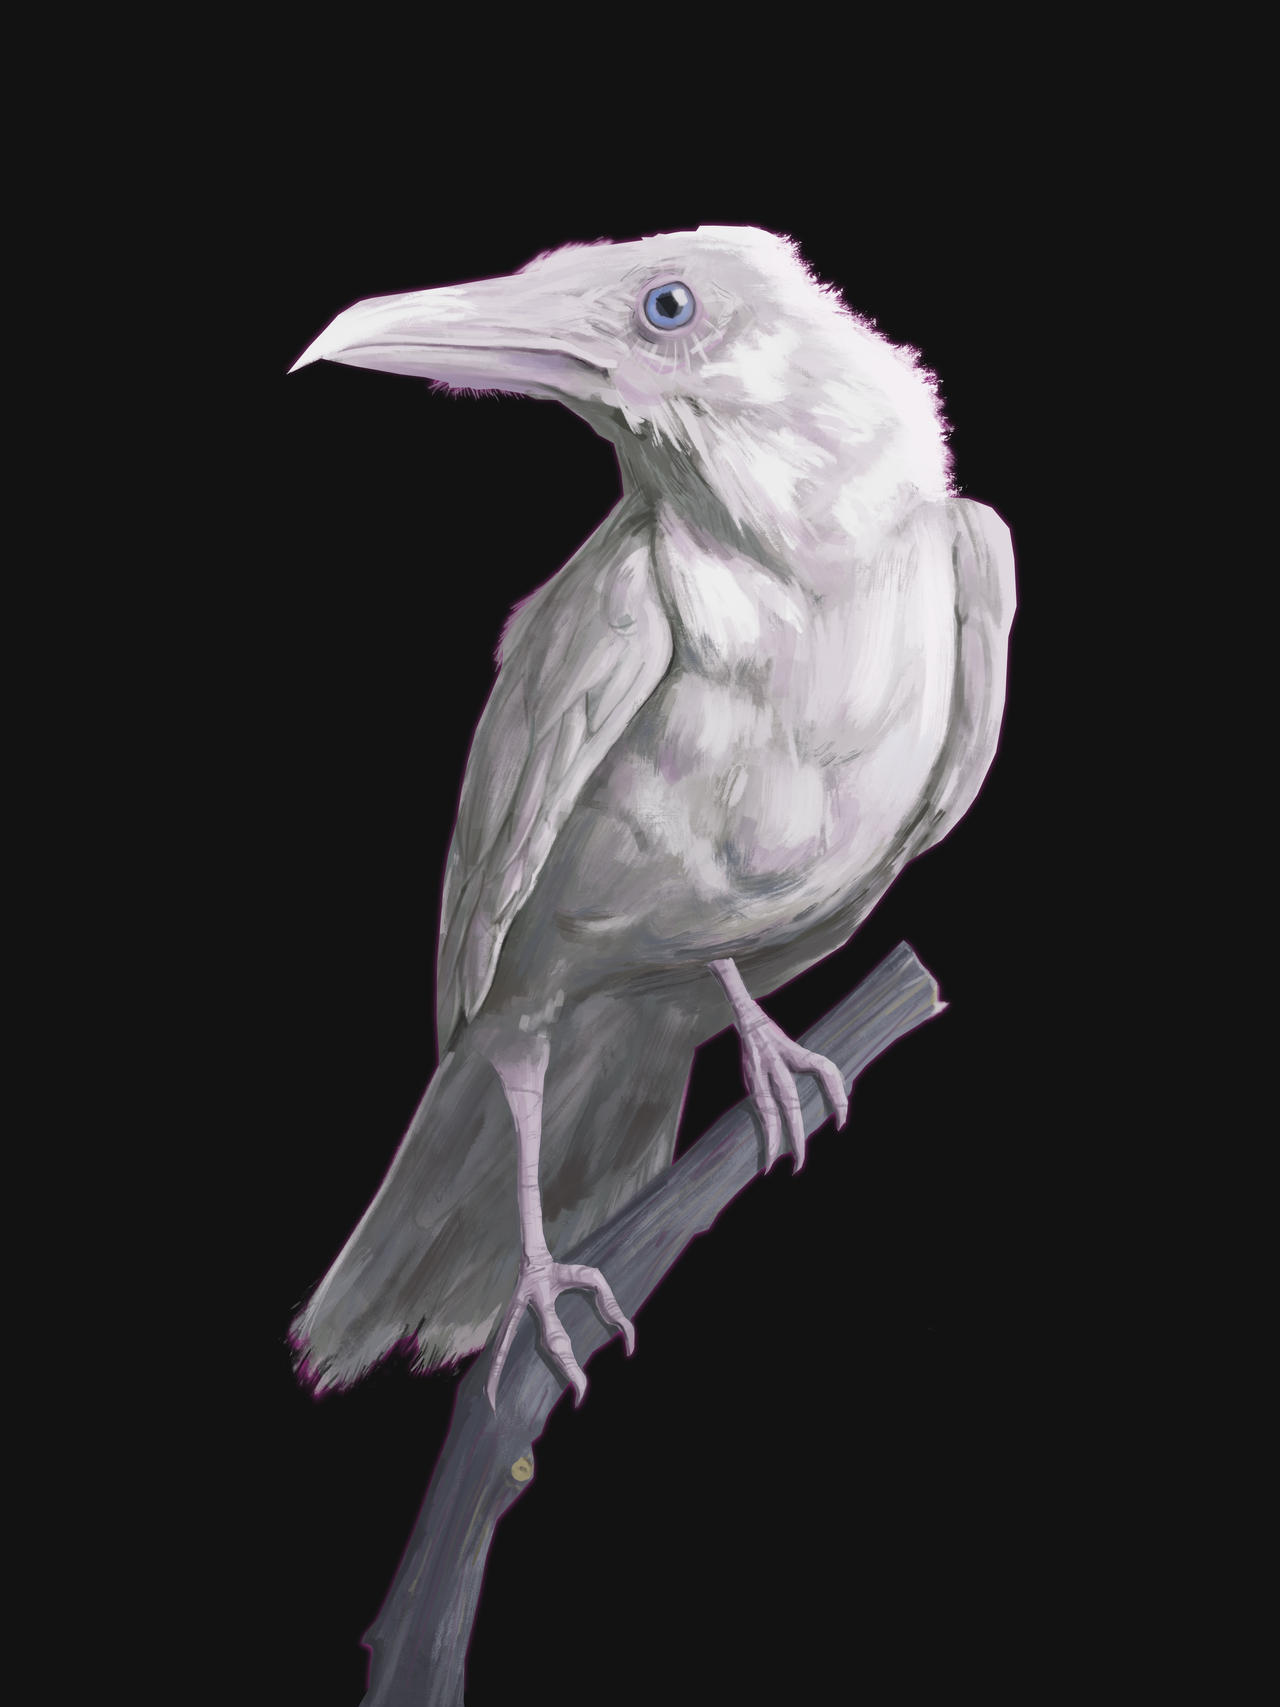 white crow by carlo94700 on DeviantArt